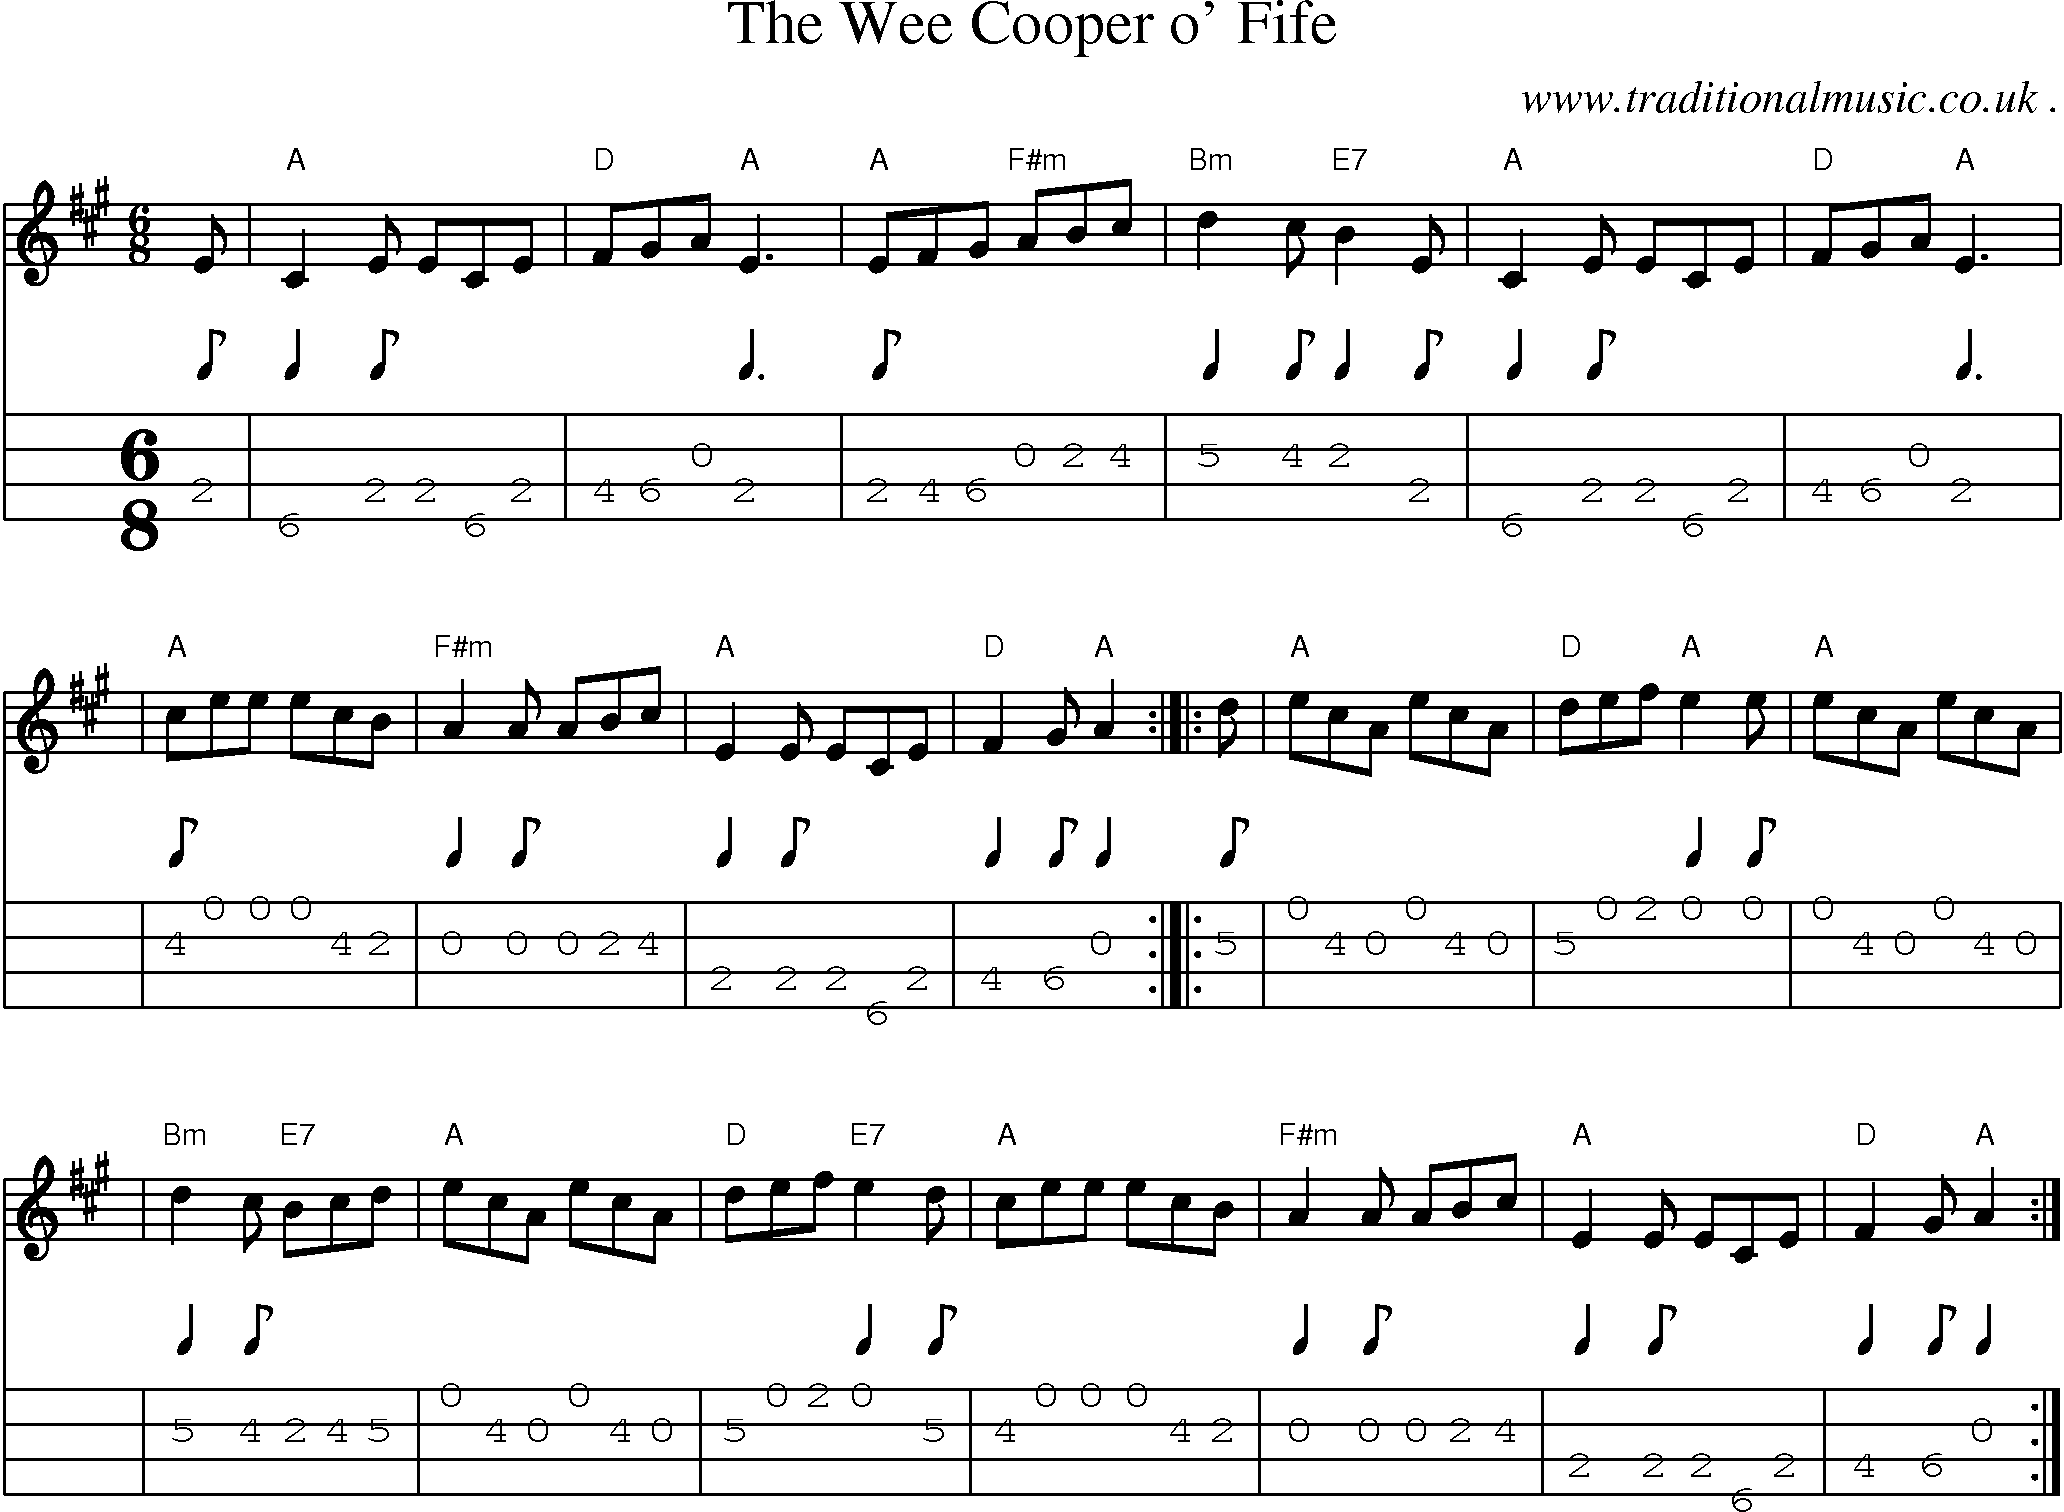 Sheet-music  score, Chords and Mandolin Tabs for The Wee Cooper O Fife